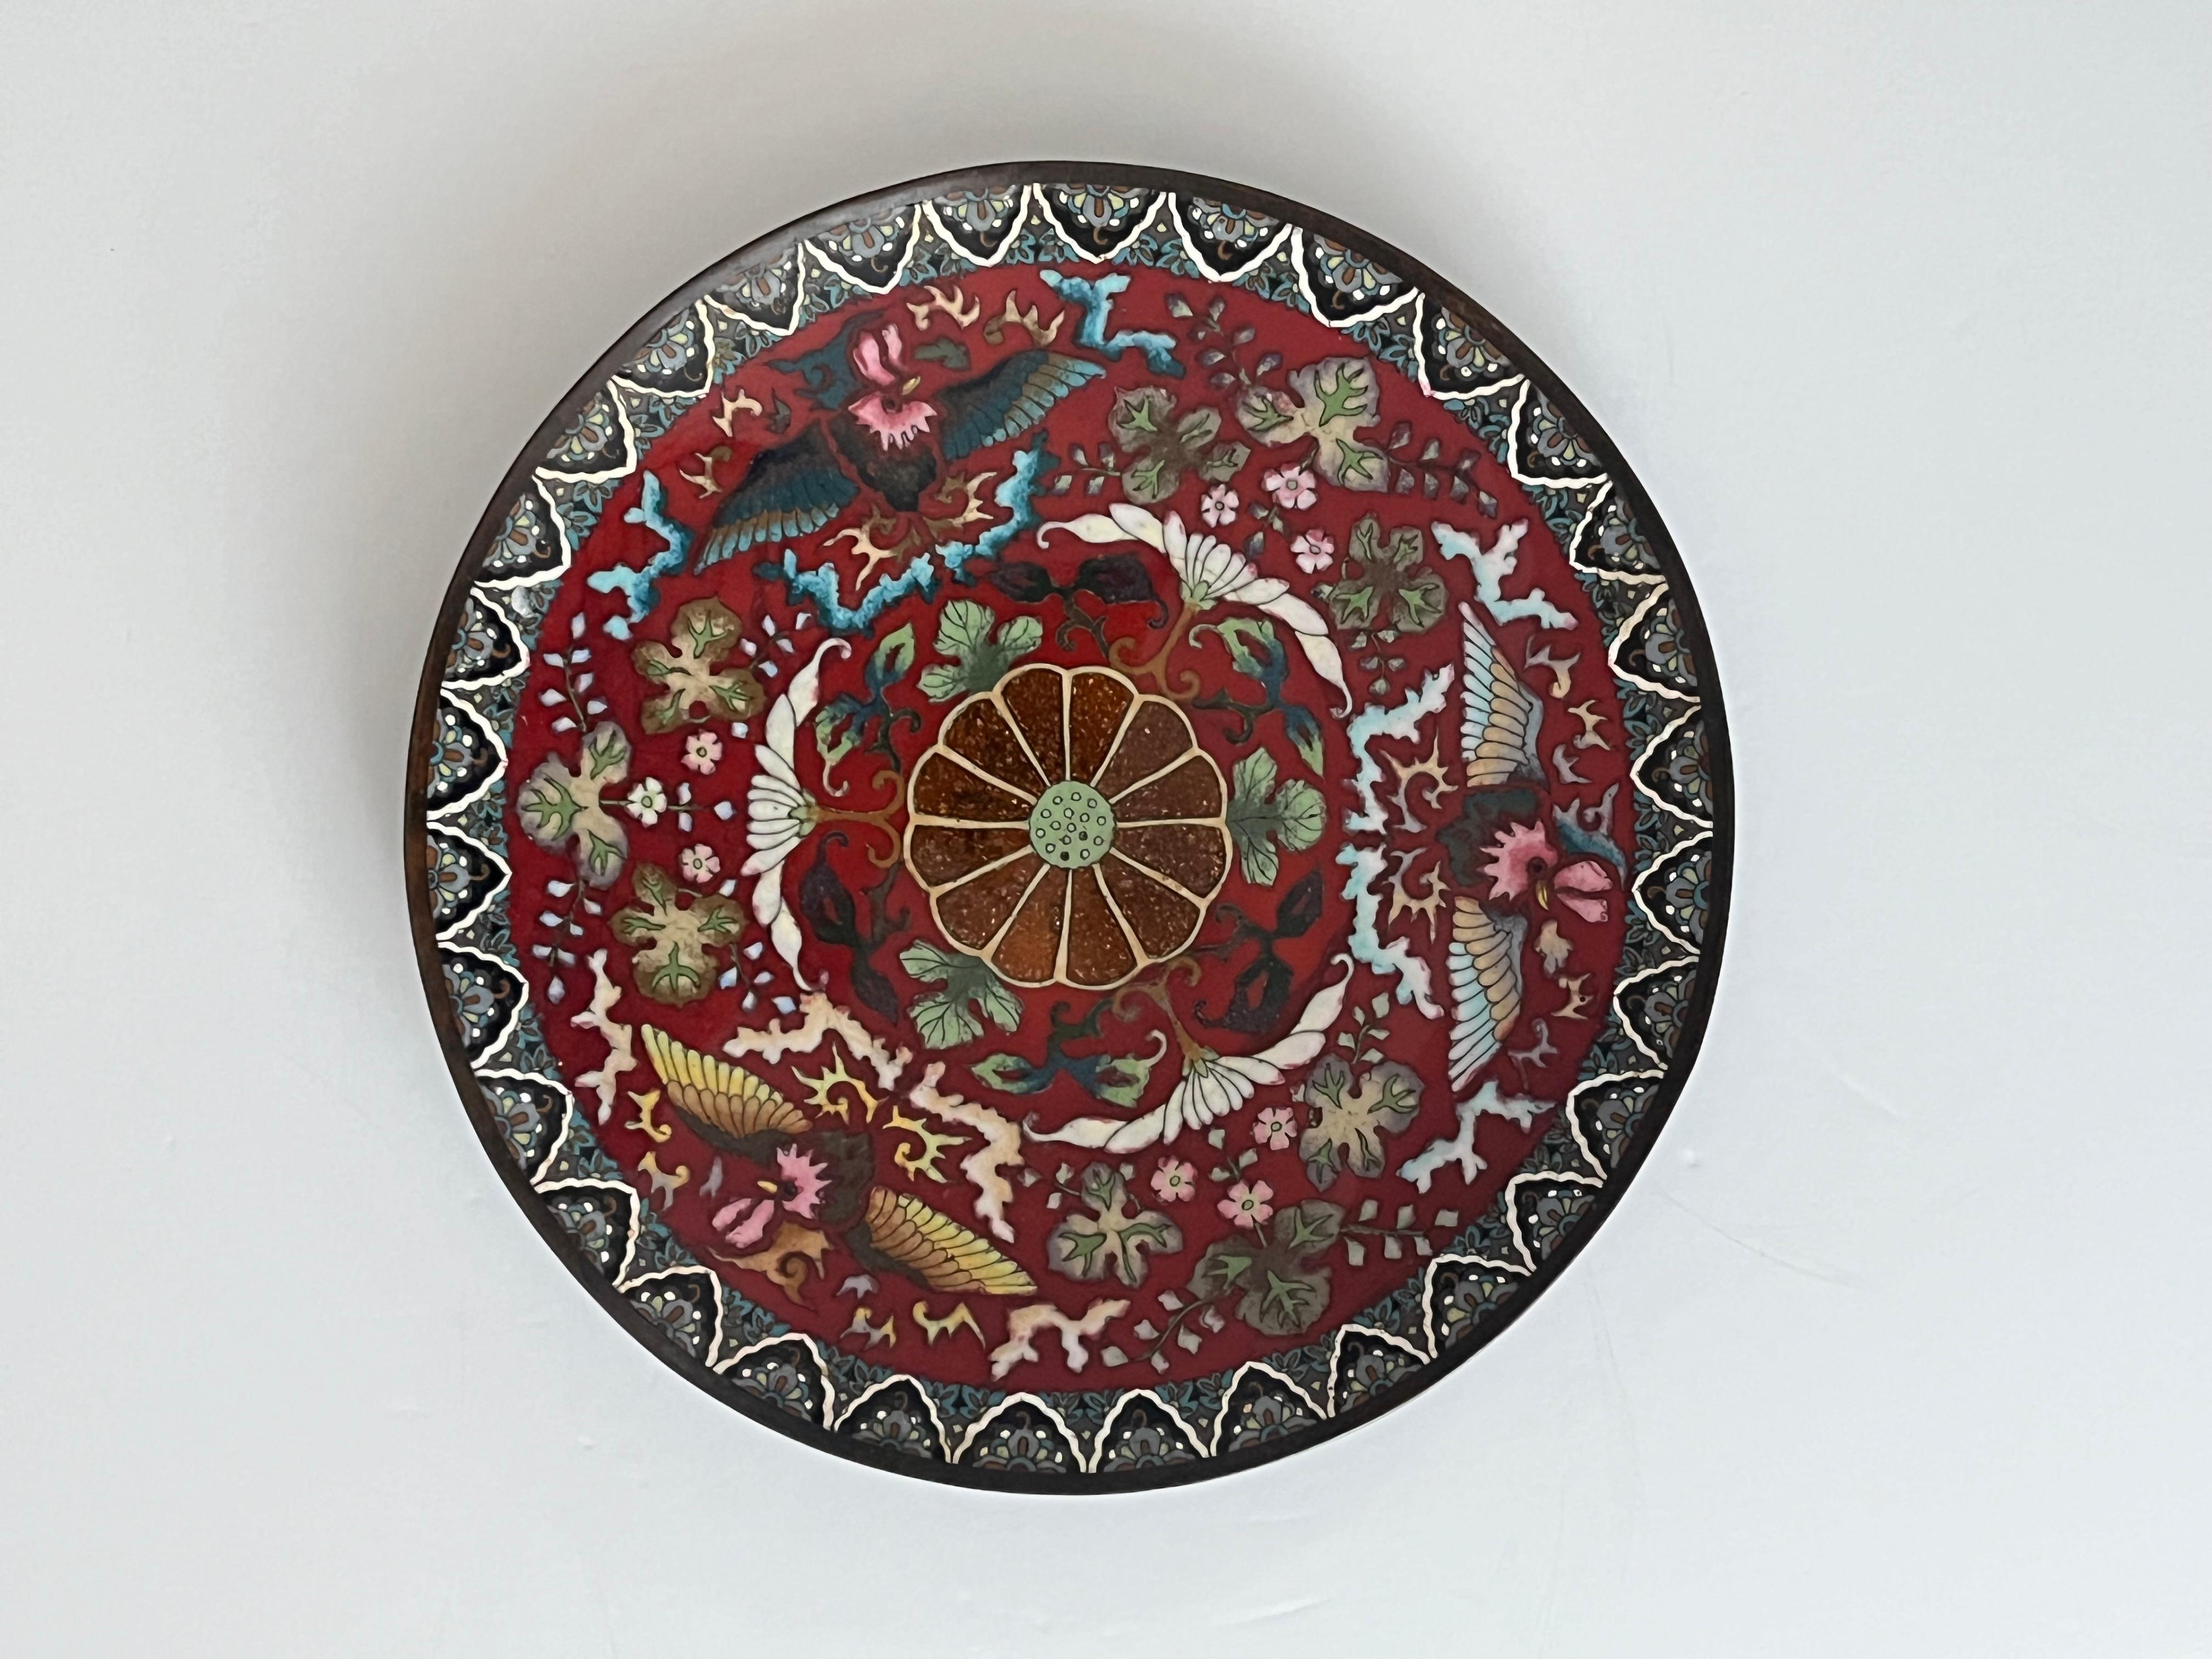 This is a very good Chinese Cloisonné Charger or Large Plate / Dish that we date to the mid-19th century of the Qing dynasty, Circa 1970.

The Charger is circular on a low foot.

The decoration shows a large central 12-lobed flower head with further